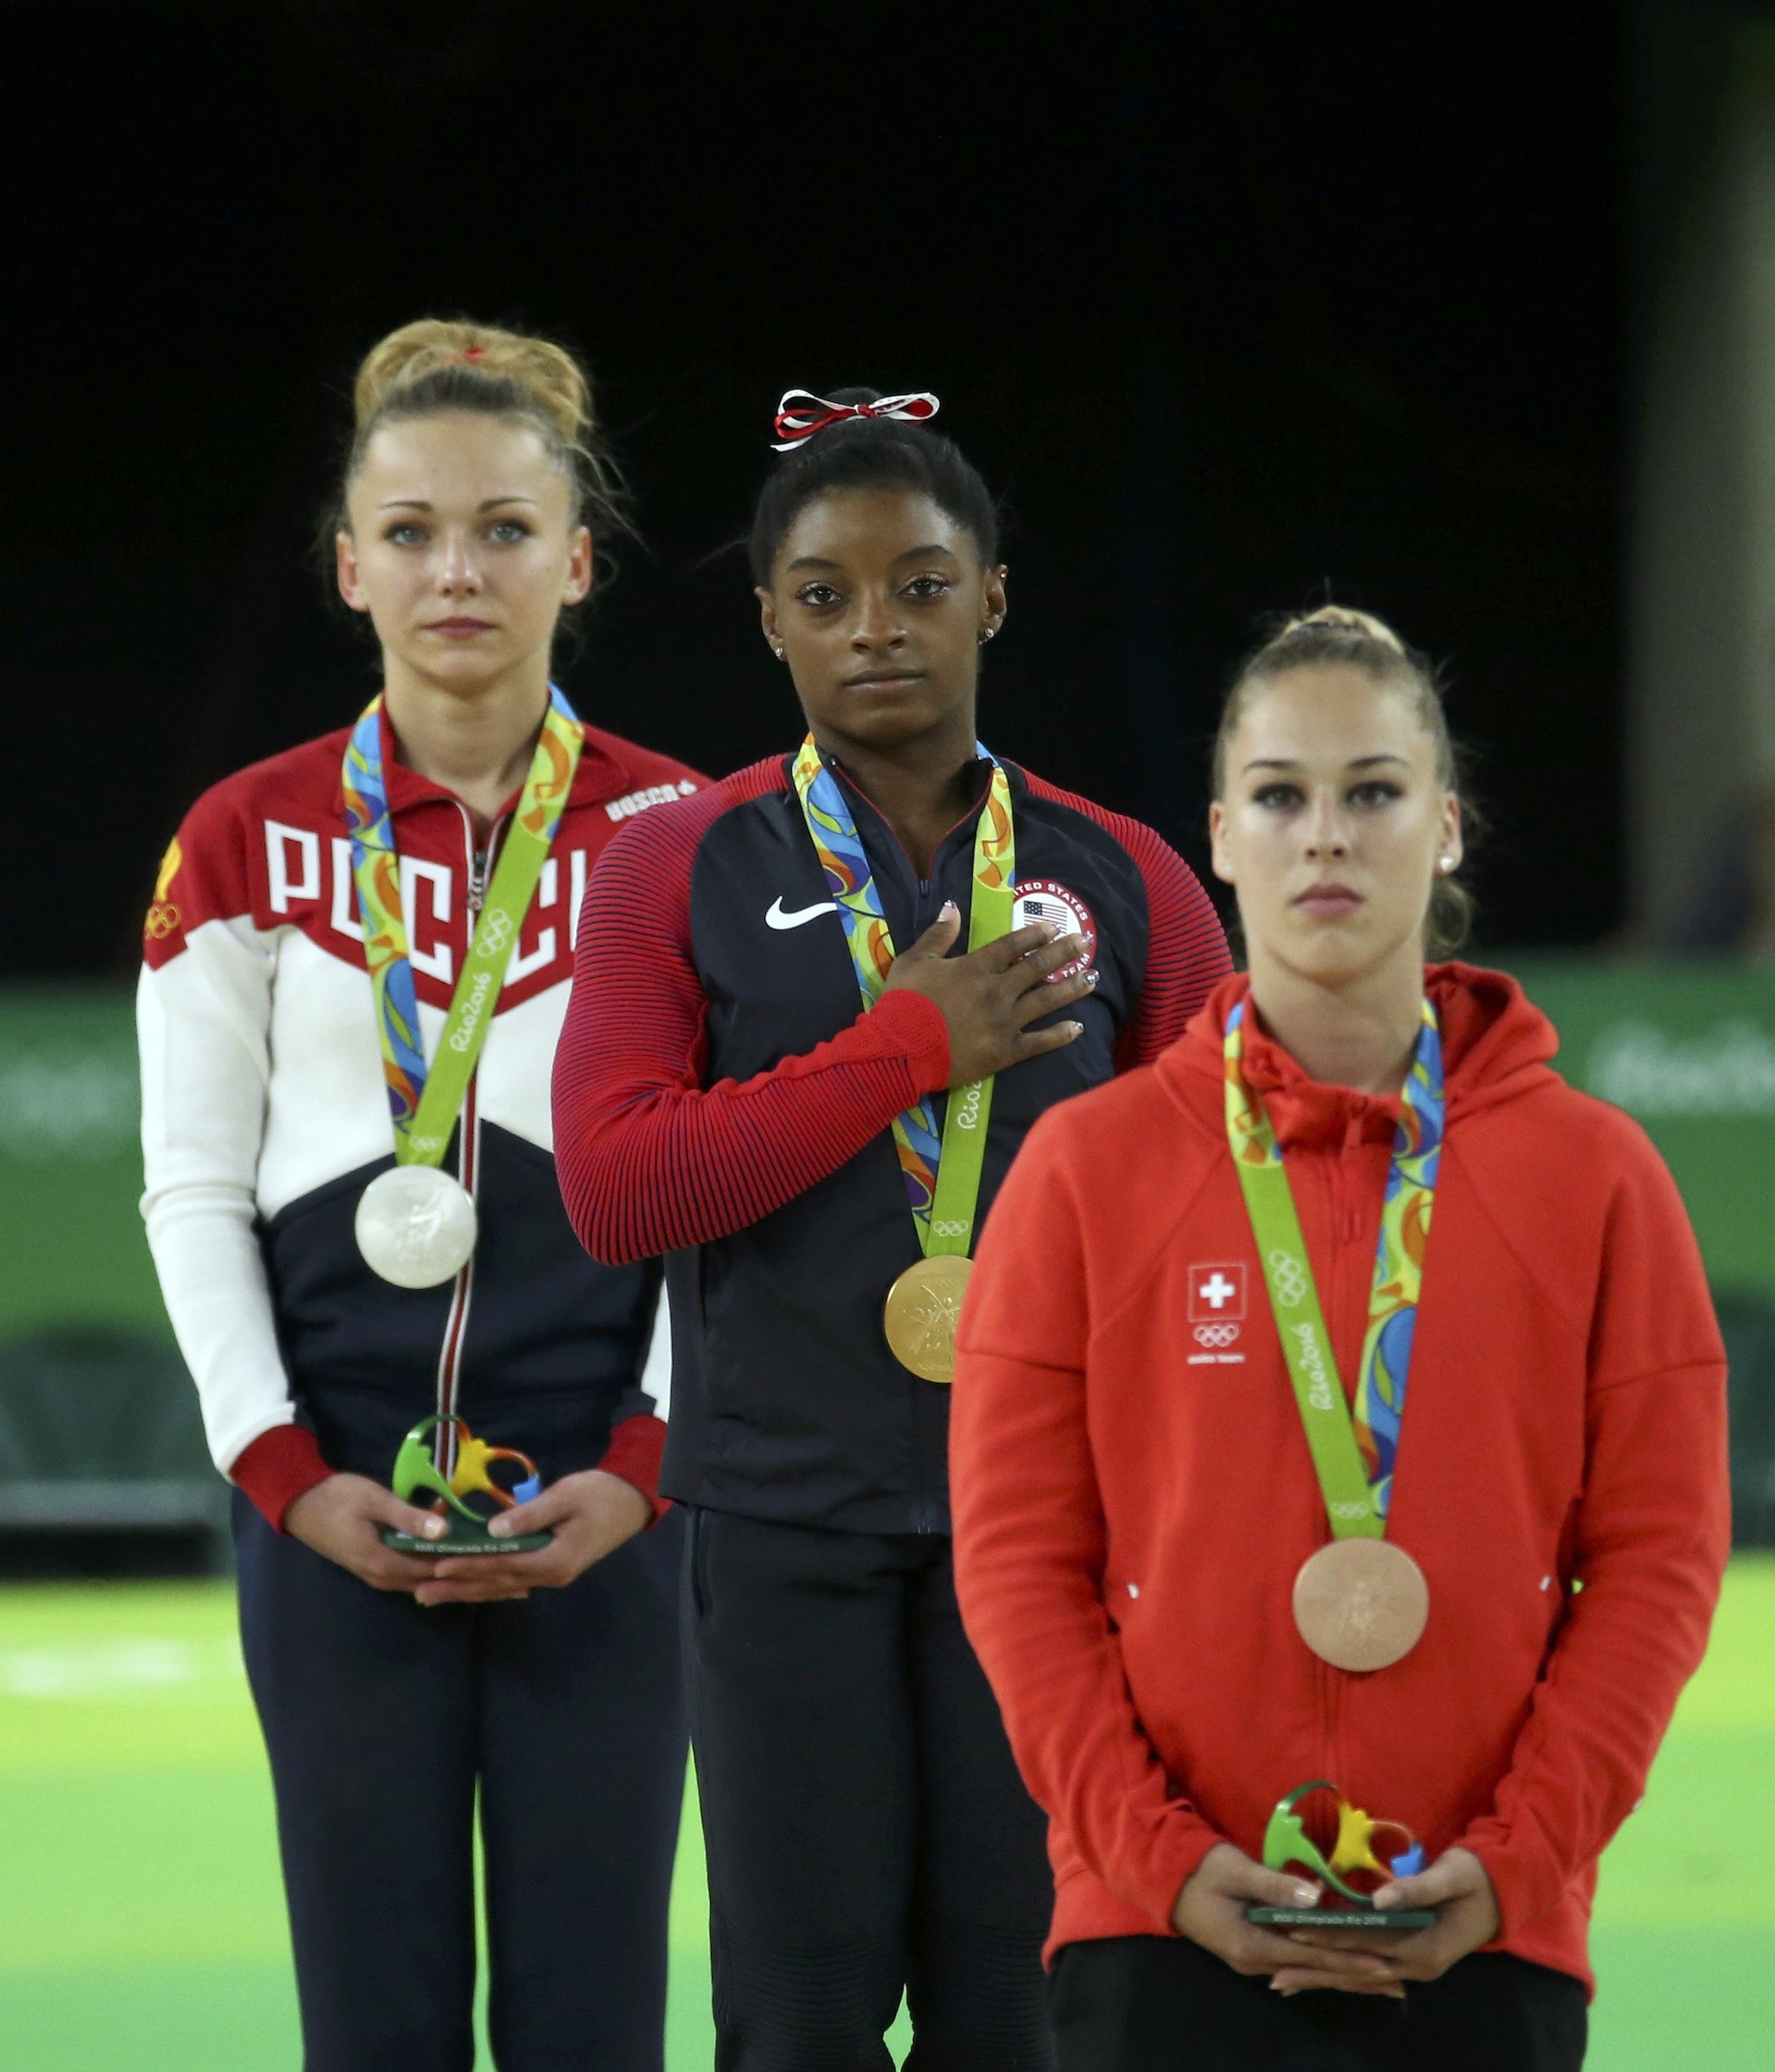 2016 Rio Olympics - Artistic Gymnastics - Victory Ceremony - Women's Vault Victory Ceremony - Rio Olympic Arena - Rio de Janeiro, Brazil - 14/08/2016. Simone Biles (USA) of USA, Giulia Steingruber (SUI) of Switzerland and Maria Paseka (RUS) of Russia listen to the USA anthem. REUTERS/Ruben Sprich FOR EDITORIAL USE ONLY. NOT FOR SALE FOR MARKETING OR ADVERTISING CAMPAIGNS.